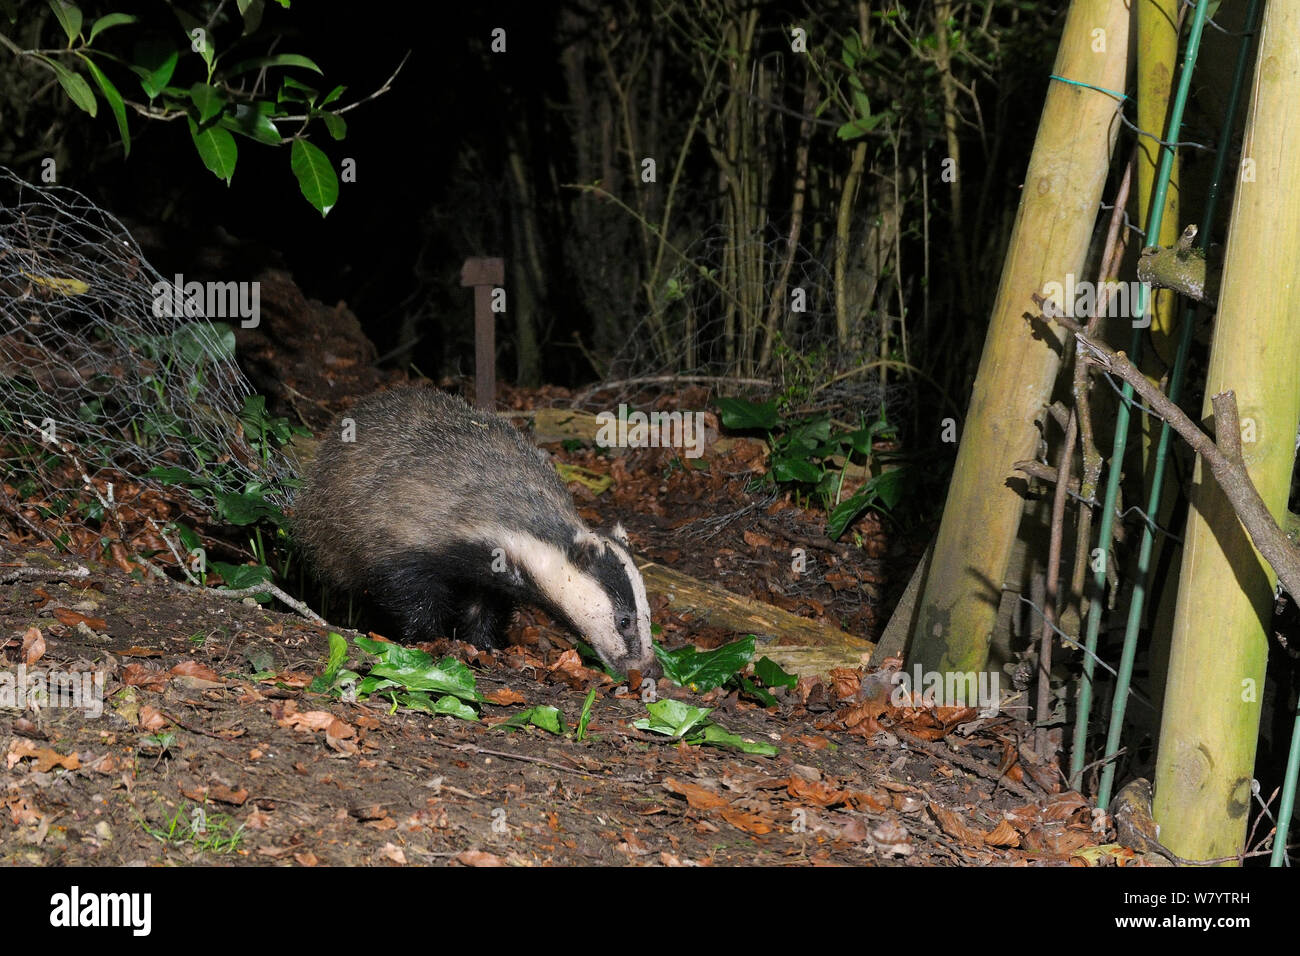 European badger (Meles meles) foraging in a garden at night as it enters through a break in a fence, Wiltshire, UK, March.  Taken by a remote camera trap. Stock Photo